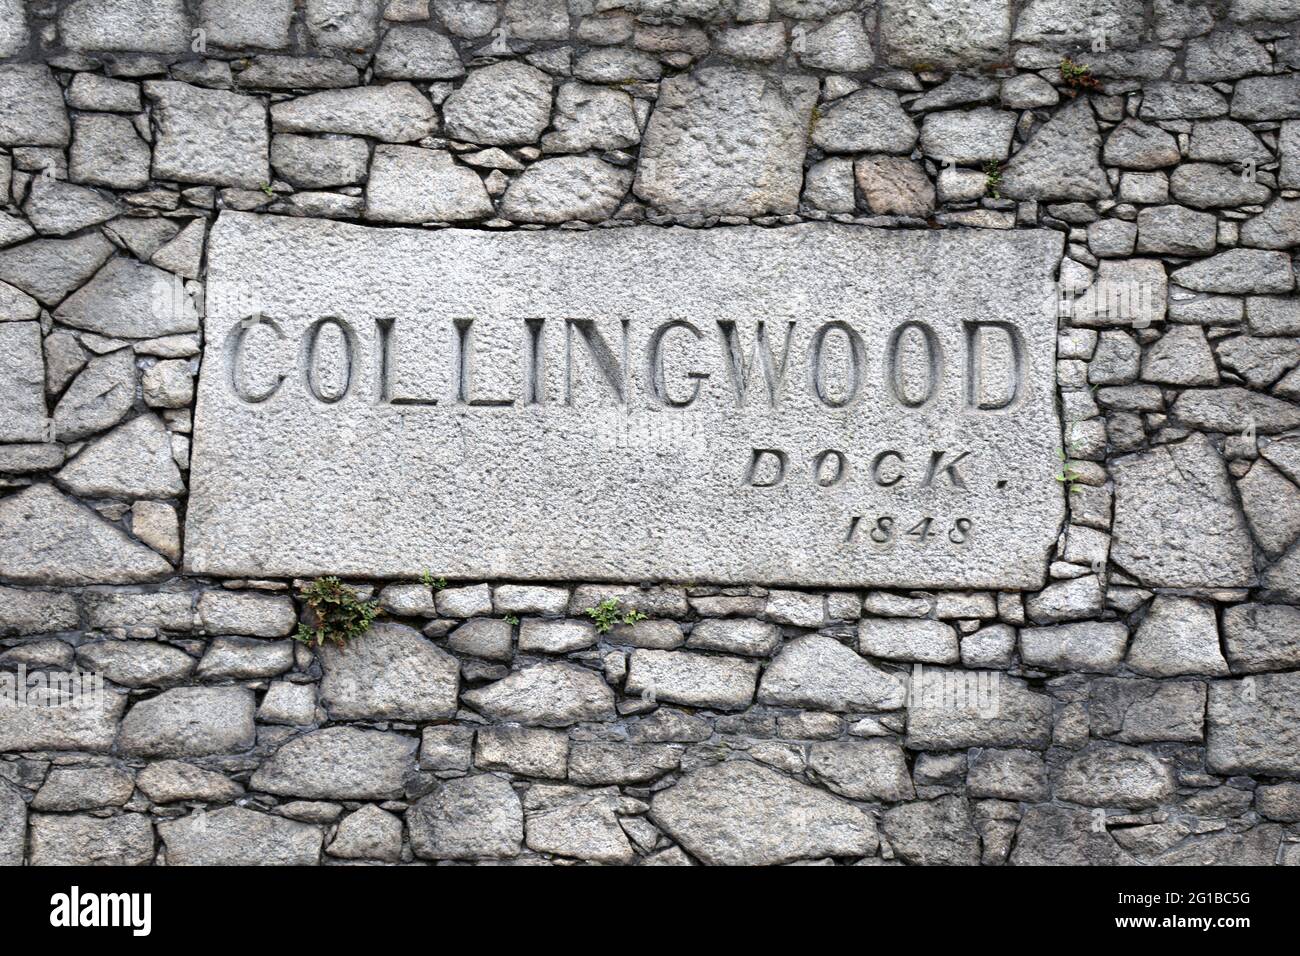 Collingwood Dock sign at Liverpool in the boundary wall of the dockyards Stock Photo